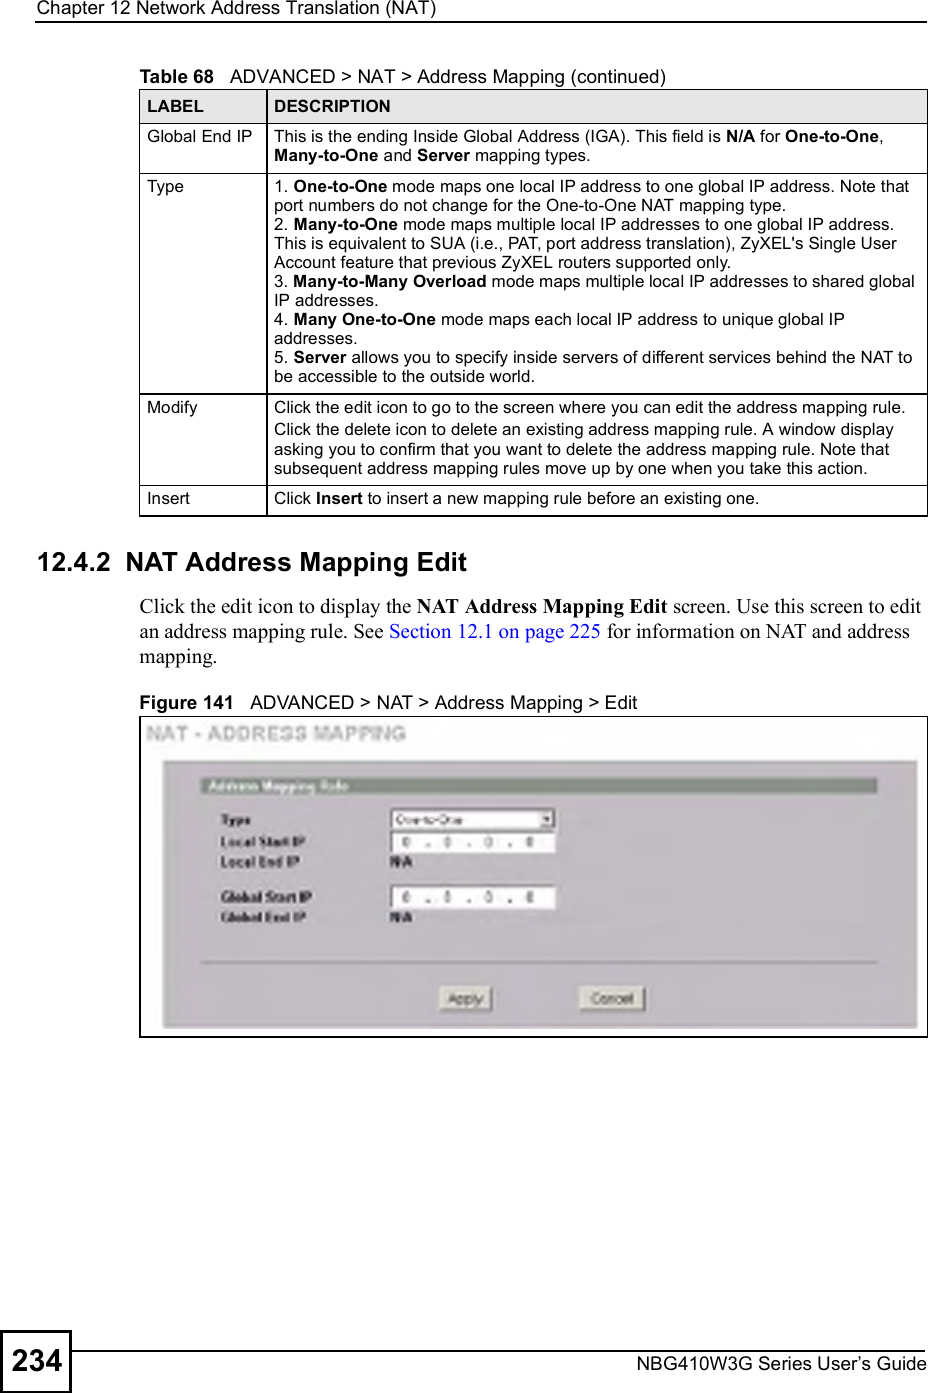 Chapter 12Network Address Translation (NAT)NBG410W3G Series User s Guide23412.4.2  NAT Address Mapping Edit Click the edit icon to display the NAT Address Mapping Edit screen. Use this screen to edit an address mapping rule. See Section 12.1 on page 225 for information on NAT and address mapping.Figure 141   ADVANCED &gt; NAT &gt; Address Mapping &gt; EditGlobal End IP This is the ending Inside Global Address (IGA). This field is N/A for One-to-One, Many-to-One and Server mapping types.Type 1. One-to-One mode maps one local IP address to one global IP address. Note that port numbers do not change for the One-to-One NAT mapping type.2. Many-to-One mode maps multiple local IP addresses to one global IP address. This is equivalent to SUA (i.e., PAT, port address translation), ZyXEL&apos;s Single User Account feature that previous ZyXEL routers supported only. 3. Many-to-Many Overload mode maps multiple local IP addresses to shared global IP addresses. 4. Many One-to-One mode maps each local IP address to unique global IP addresses. 5. Server allows you to specify inside servers of different services behind the NAT to be accessible to the outside world.Modify Click the edit icon to go to the screen where you can edit the address mapping rule.Click the delete icon to delete an existing address mapping rule. A window display asking you to confirm that you want to delete the address mapping rule. Note that subsequent address mapping rules move up by one when you take this action.Insert Click Insert to insert a new mapping rule before an existing one.Table 68   ADVANCED &gt; NAT &gt; Address Mapping (continued)LABEL DESCRIPTION